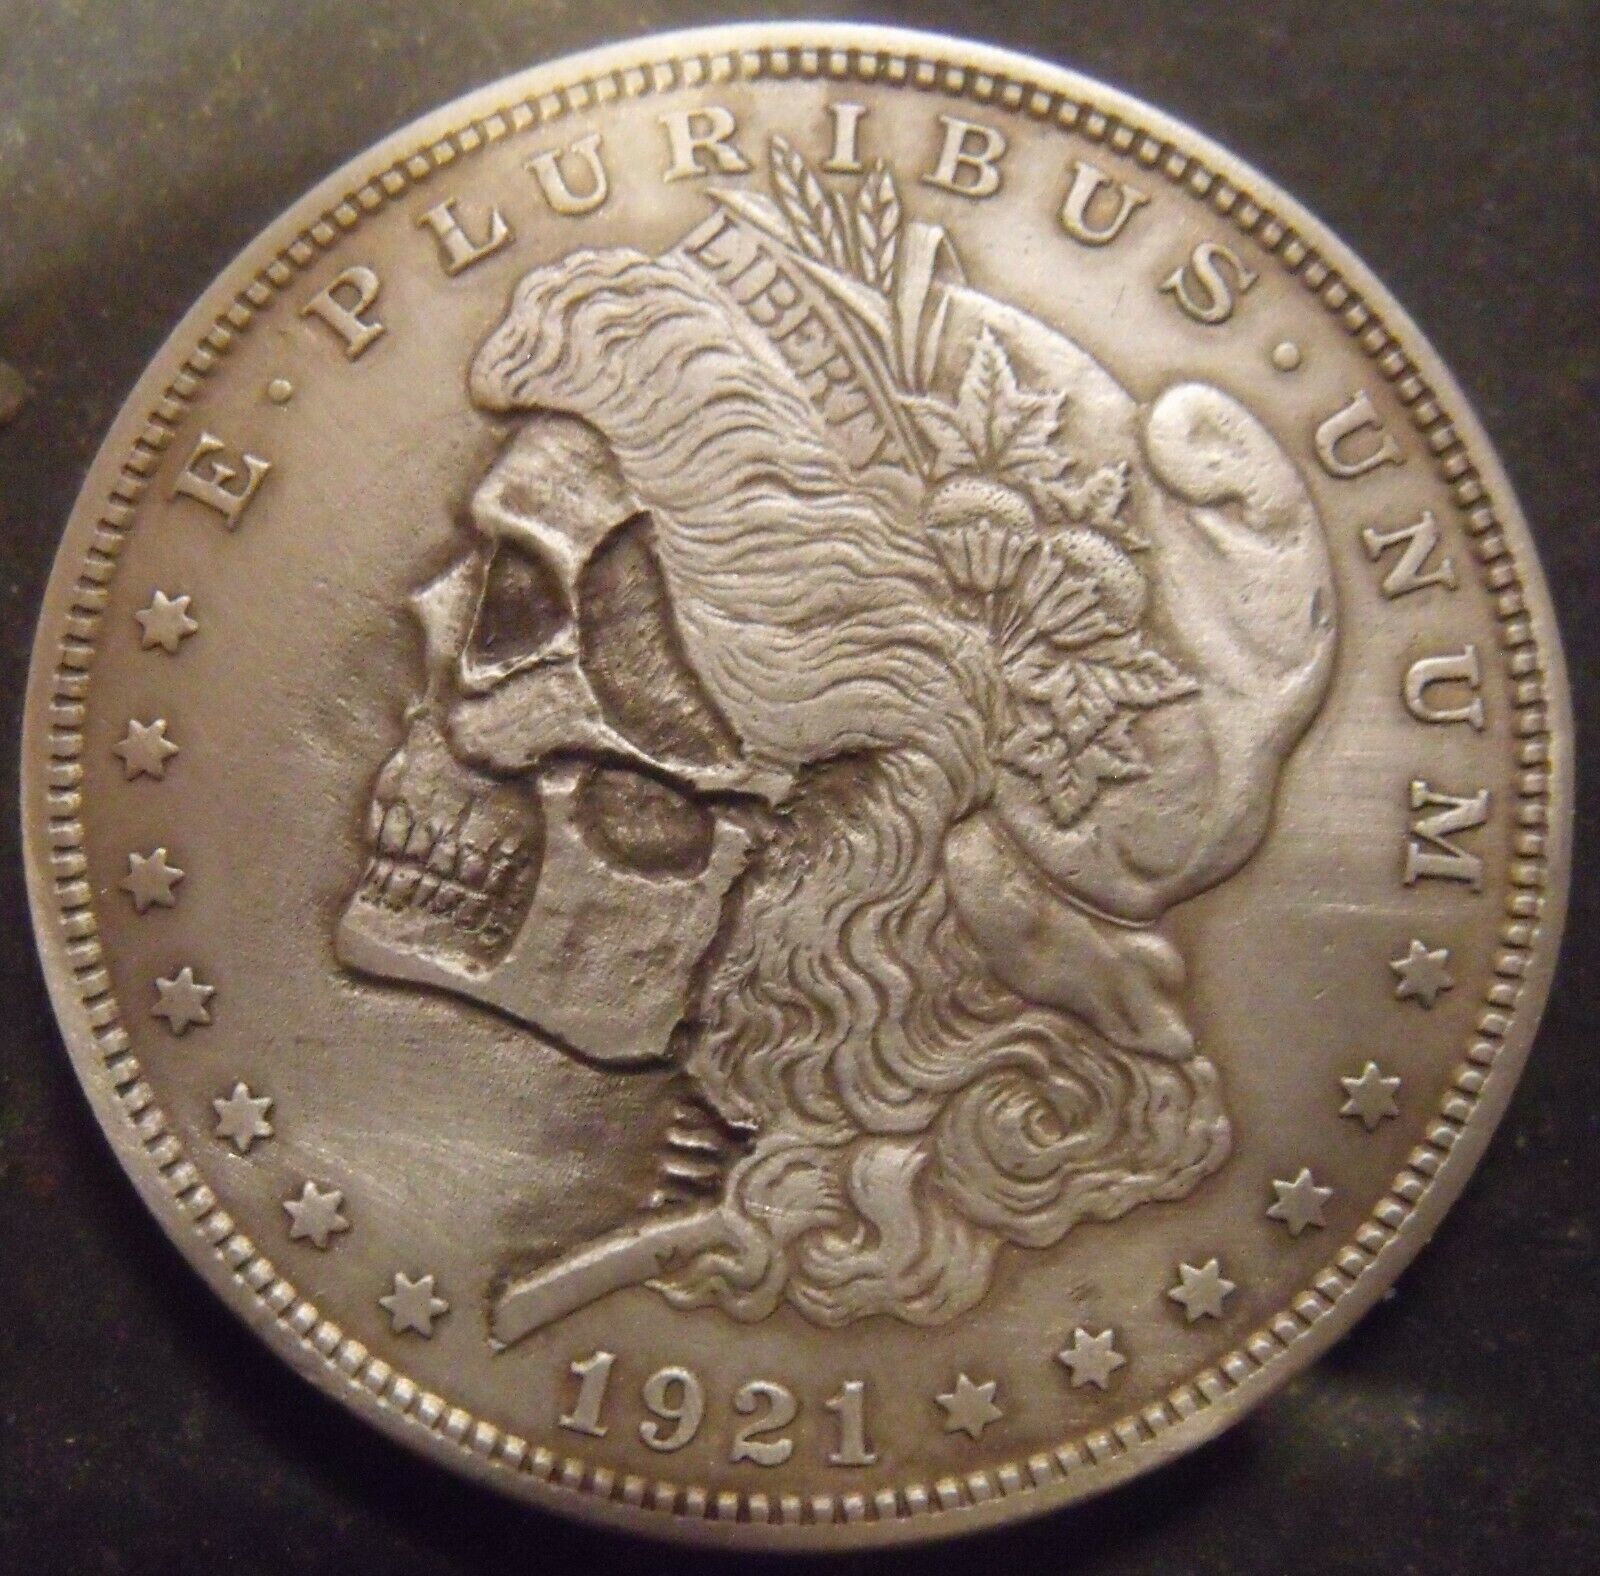 Hand Carved  Hobo Nickel Skull Real Silver Dollar #2  Free Mail Rim Signed